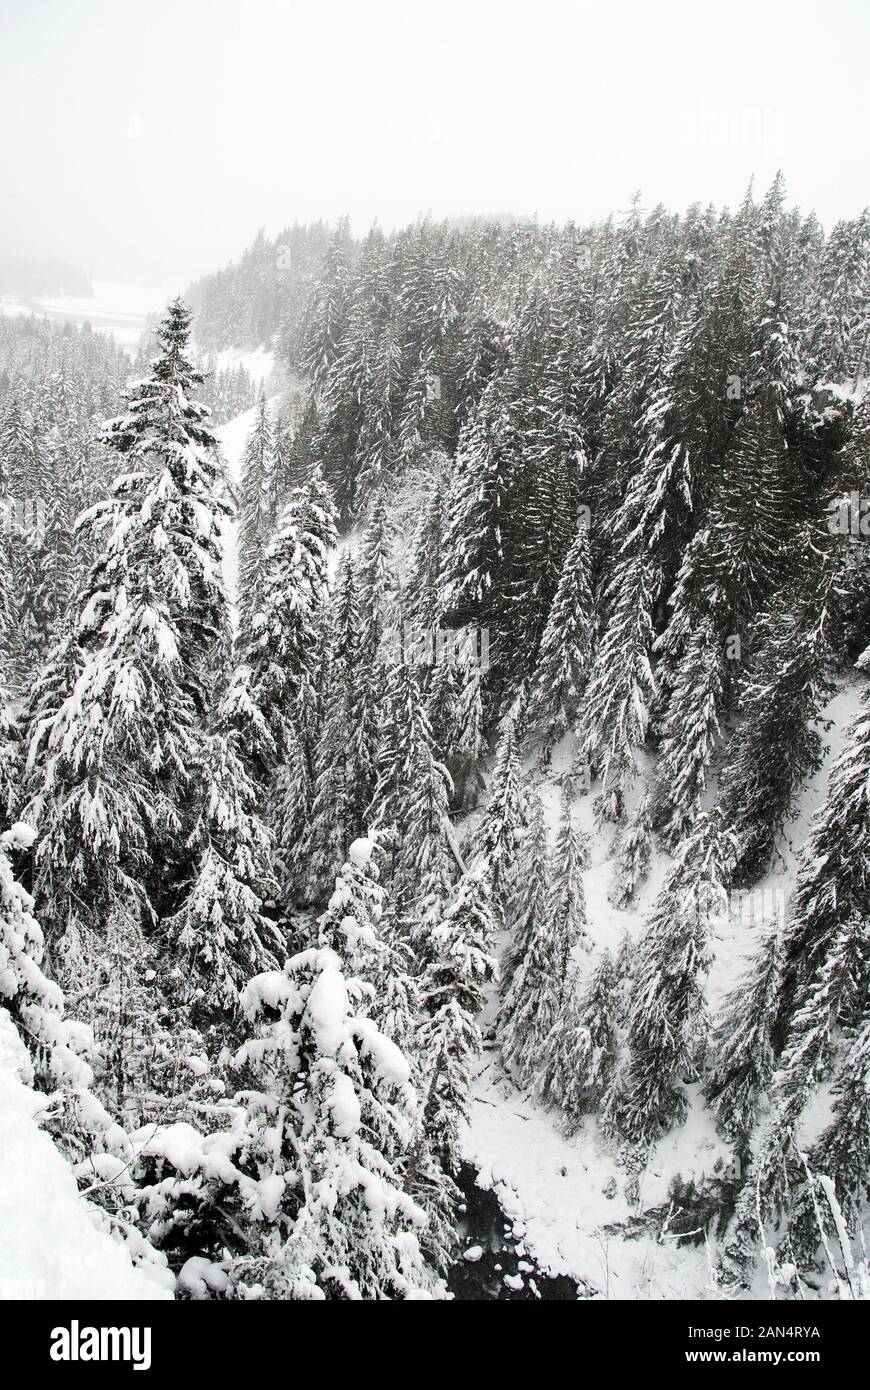 Snow covered evergreen trees in the deep valley at Brandywine Falls Provincial Park, British Columbia, Canada Stock Photo